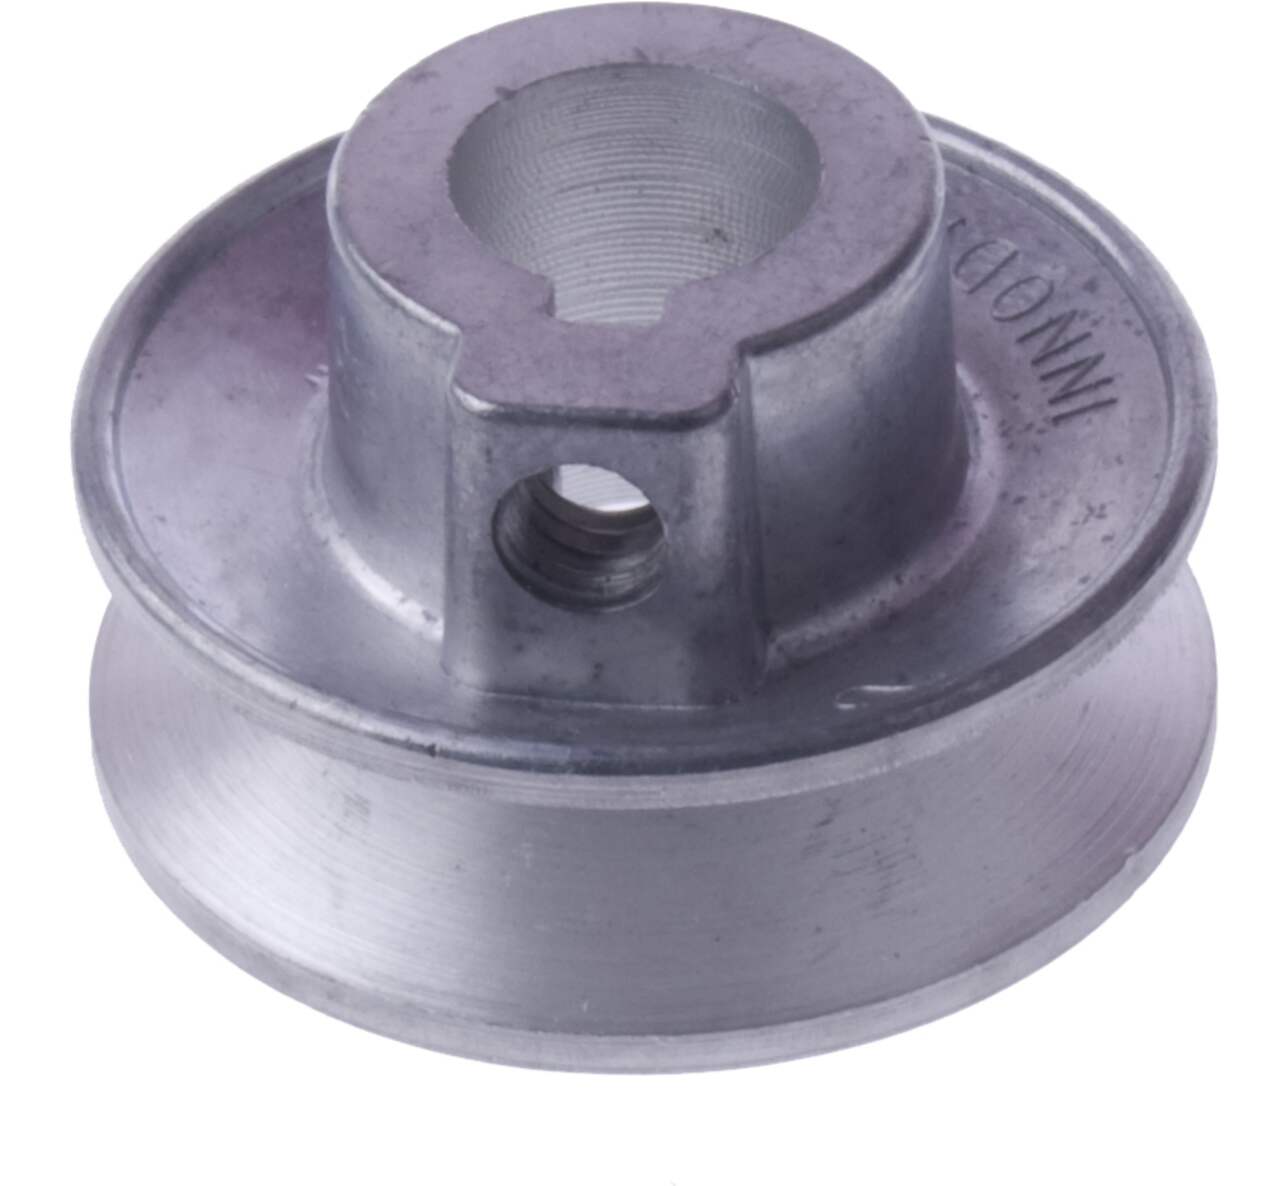 https://media-www.canadiantire.ca/product/fixing/electrical/rough-electrical/0565712/v-pulley-hd-2x5-8-294c449d-a6d1-4a63-8a69-ba80df3aec2d.png?imdensity=1&imwidth=640&impolicy=mZoom